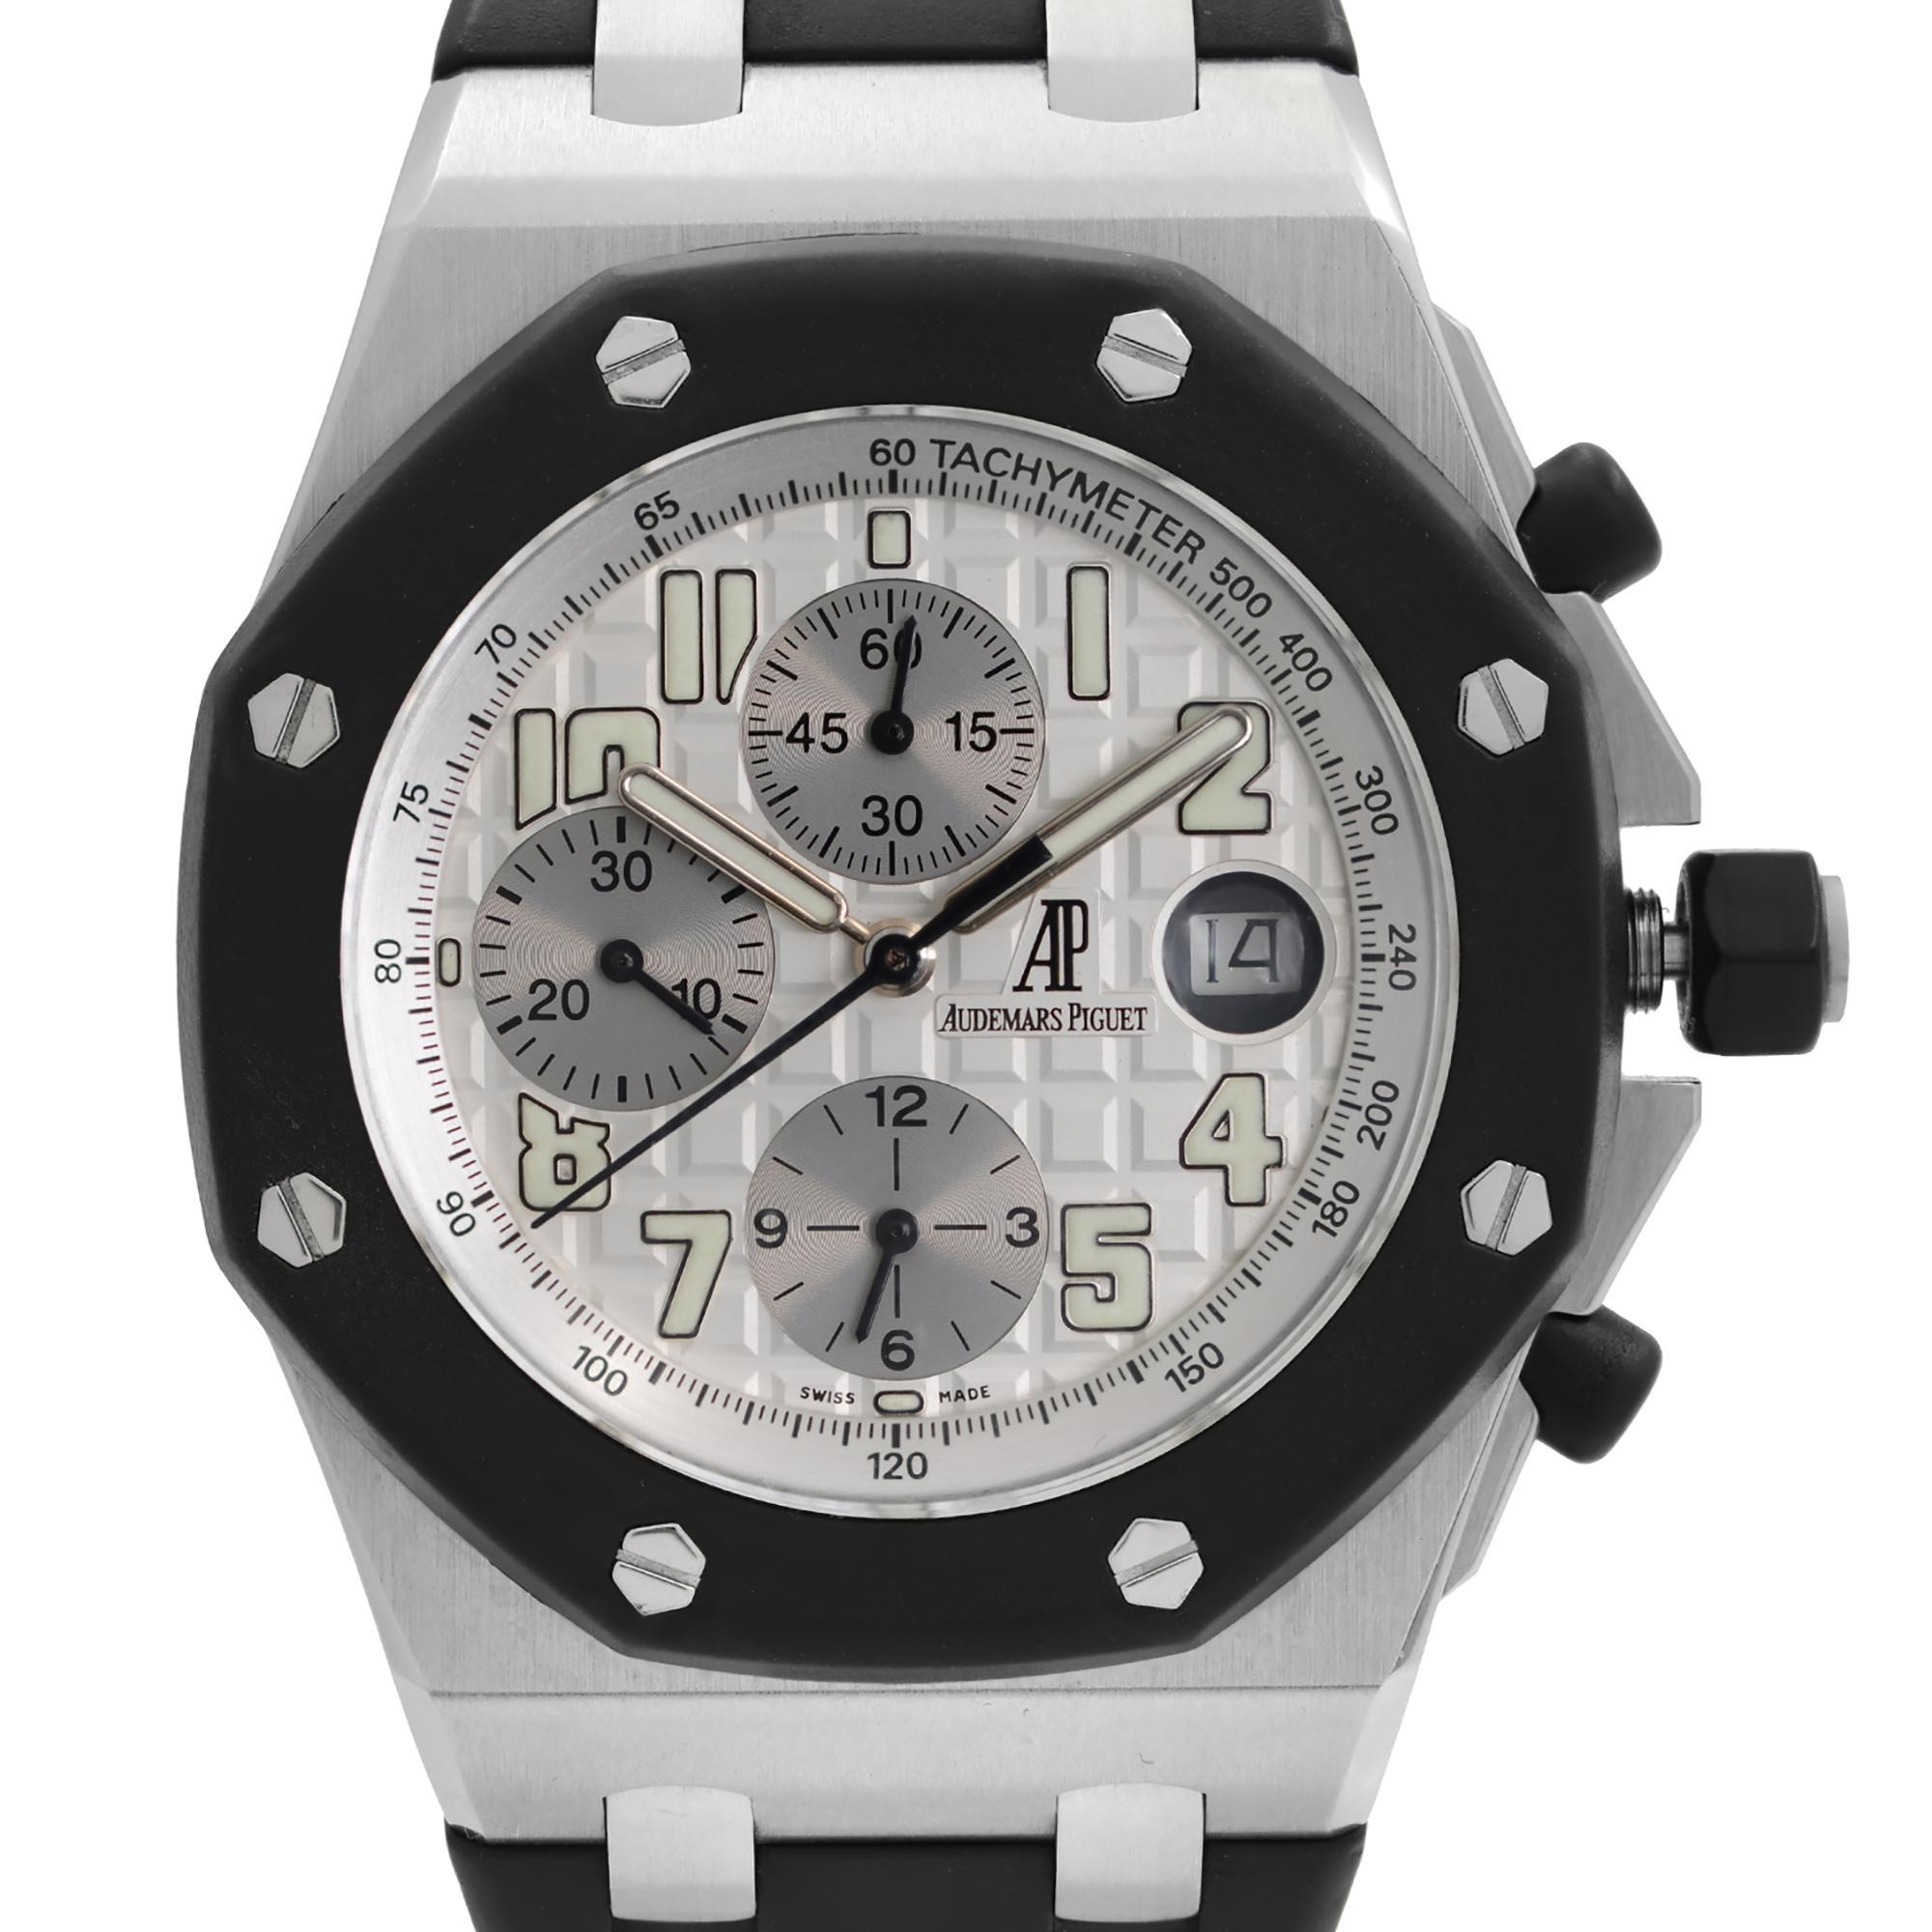 Pre-owned Audemars Piguet Royal Oak Offshore 42mm Rubberclad Steel Chronograph Silver Dial Automatic Men's Watch25940SK.OO.D002CA.02. This Beautiful Timepiece is Powered by Mechanical (Automatic) Movement Features: Stainless Steel Case with a Black